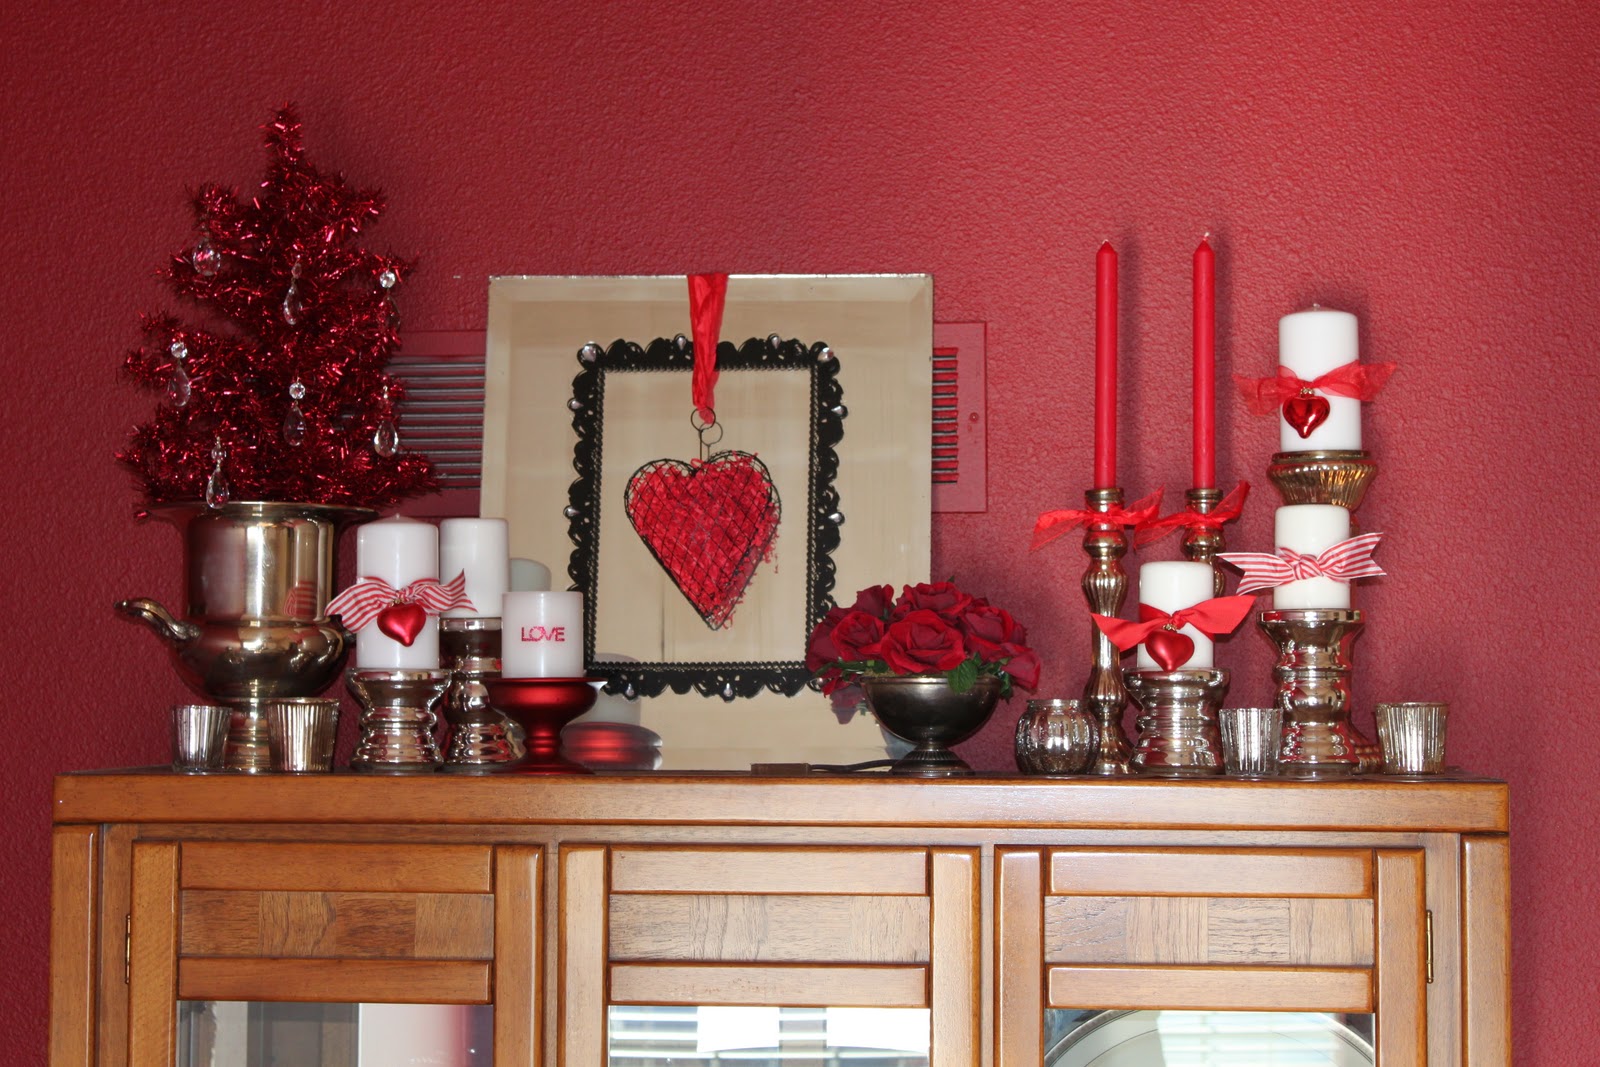 lovely-valentine-top-sideboard-decoration-with-red-and-white-candle-decor-also-roses-in-vase-ideas-for-valentine-day-ideas